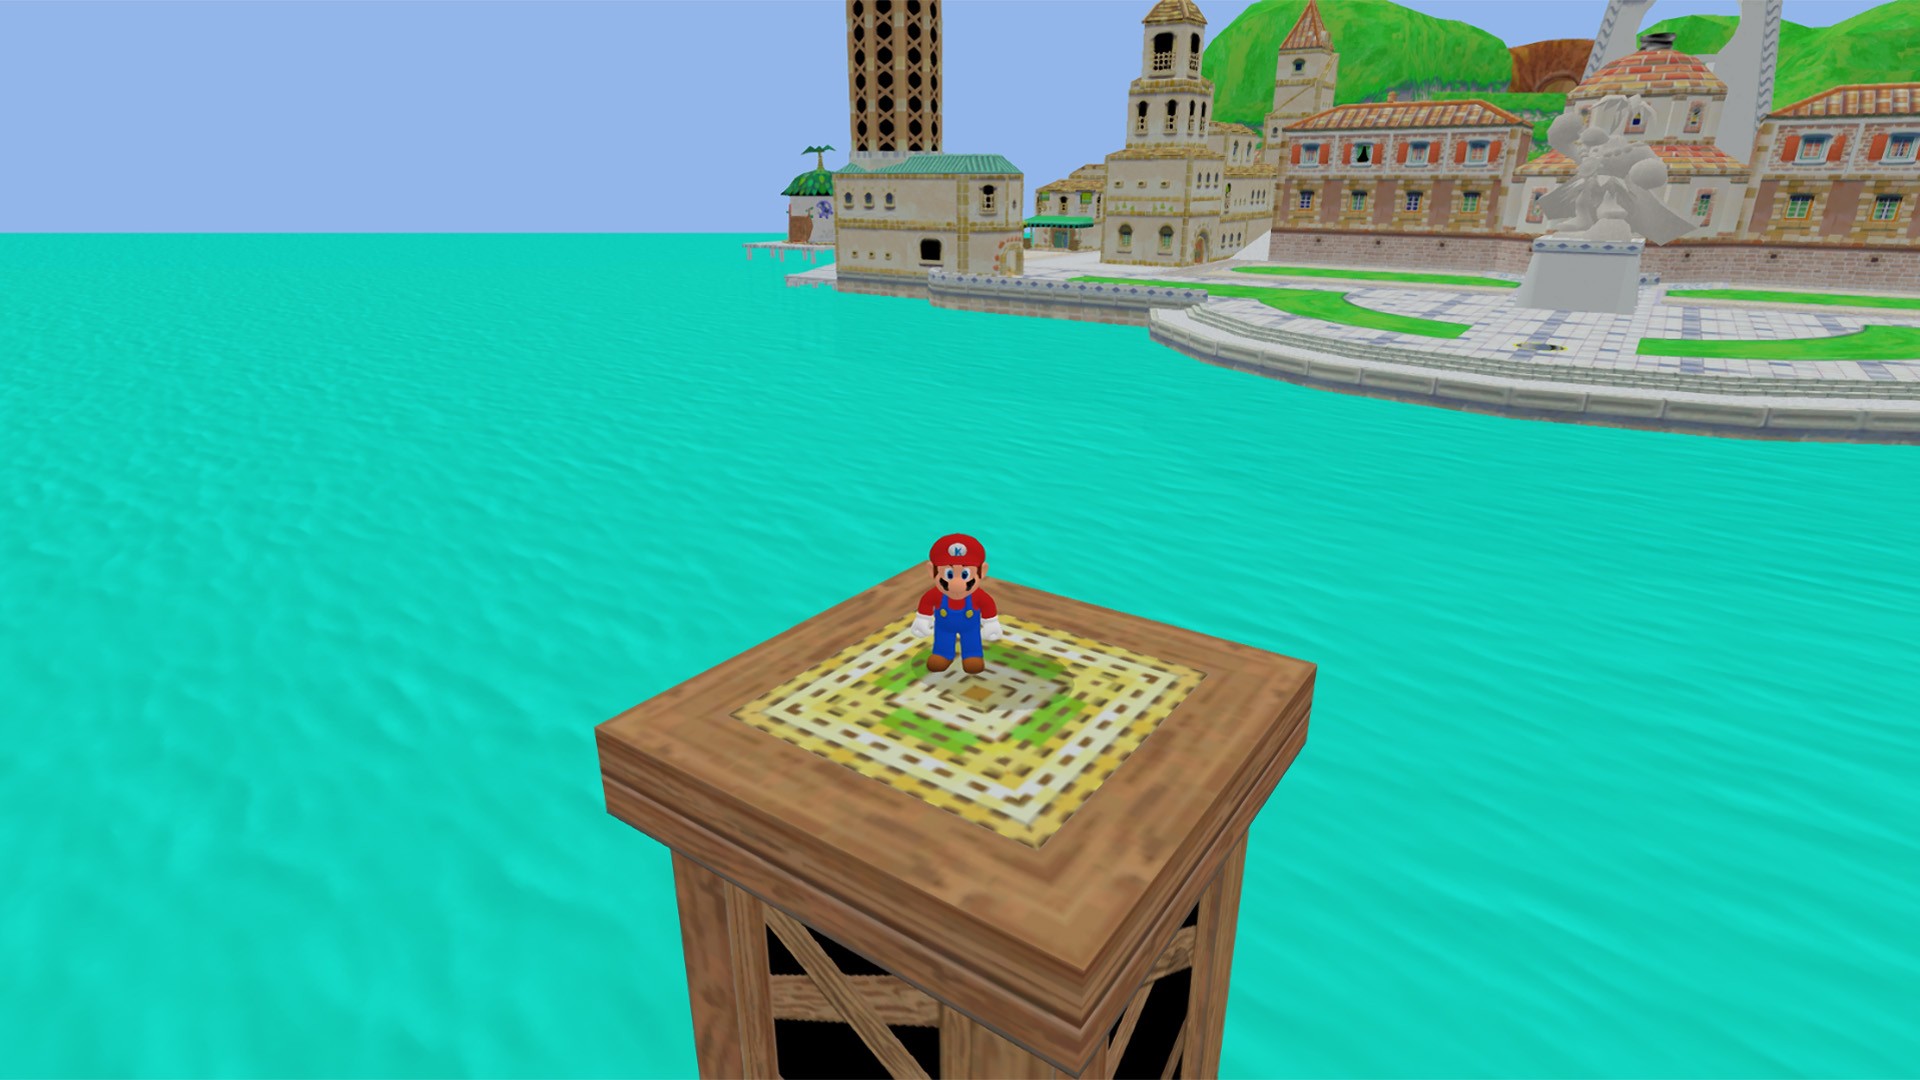 Game screenshot: water shader with low-poly Italian city.